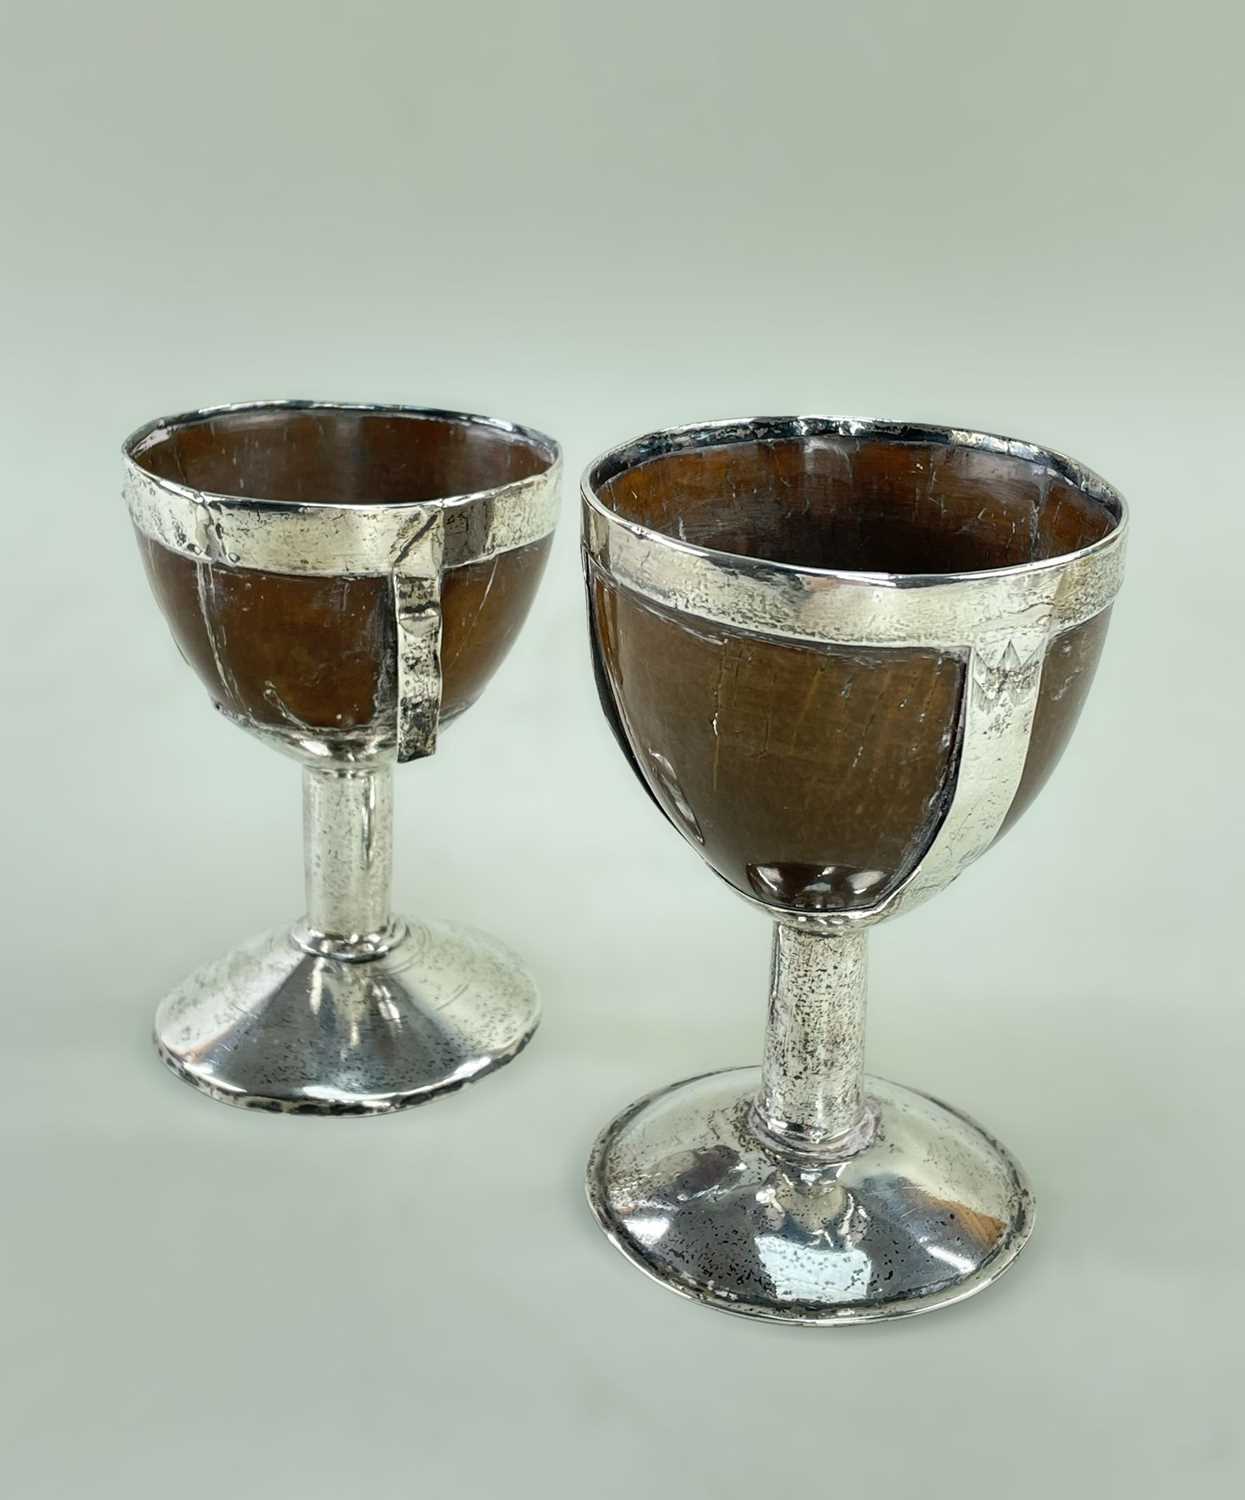 TWO SILVER MOUNTED COCONUT GOBLETS, c. 1800, one with feather engraved decoration, tallest 12cm h (